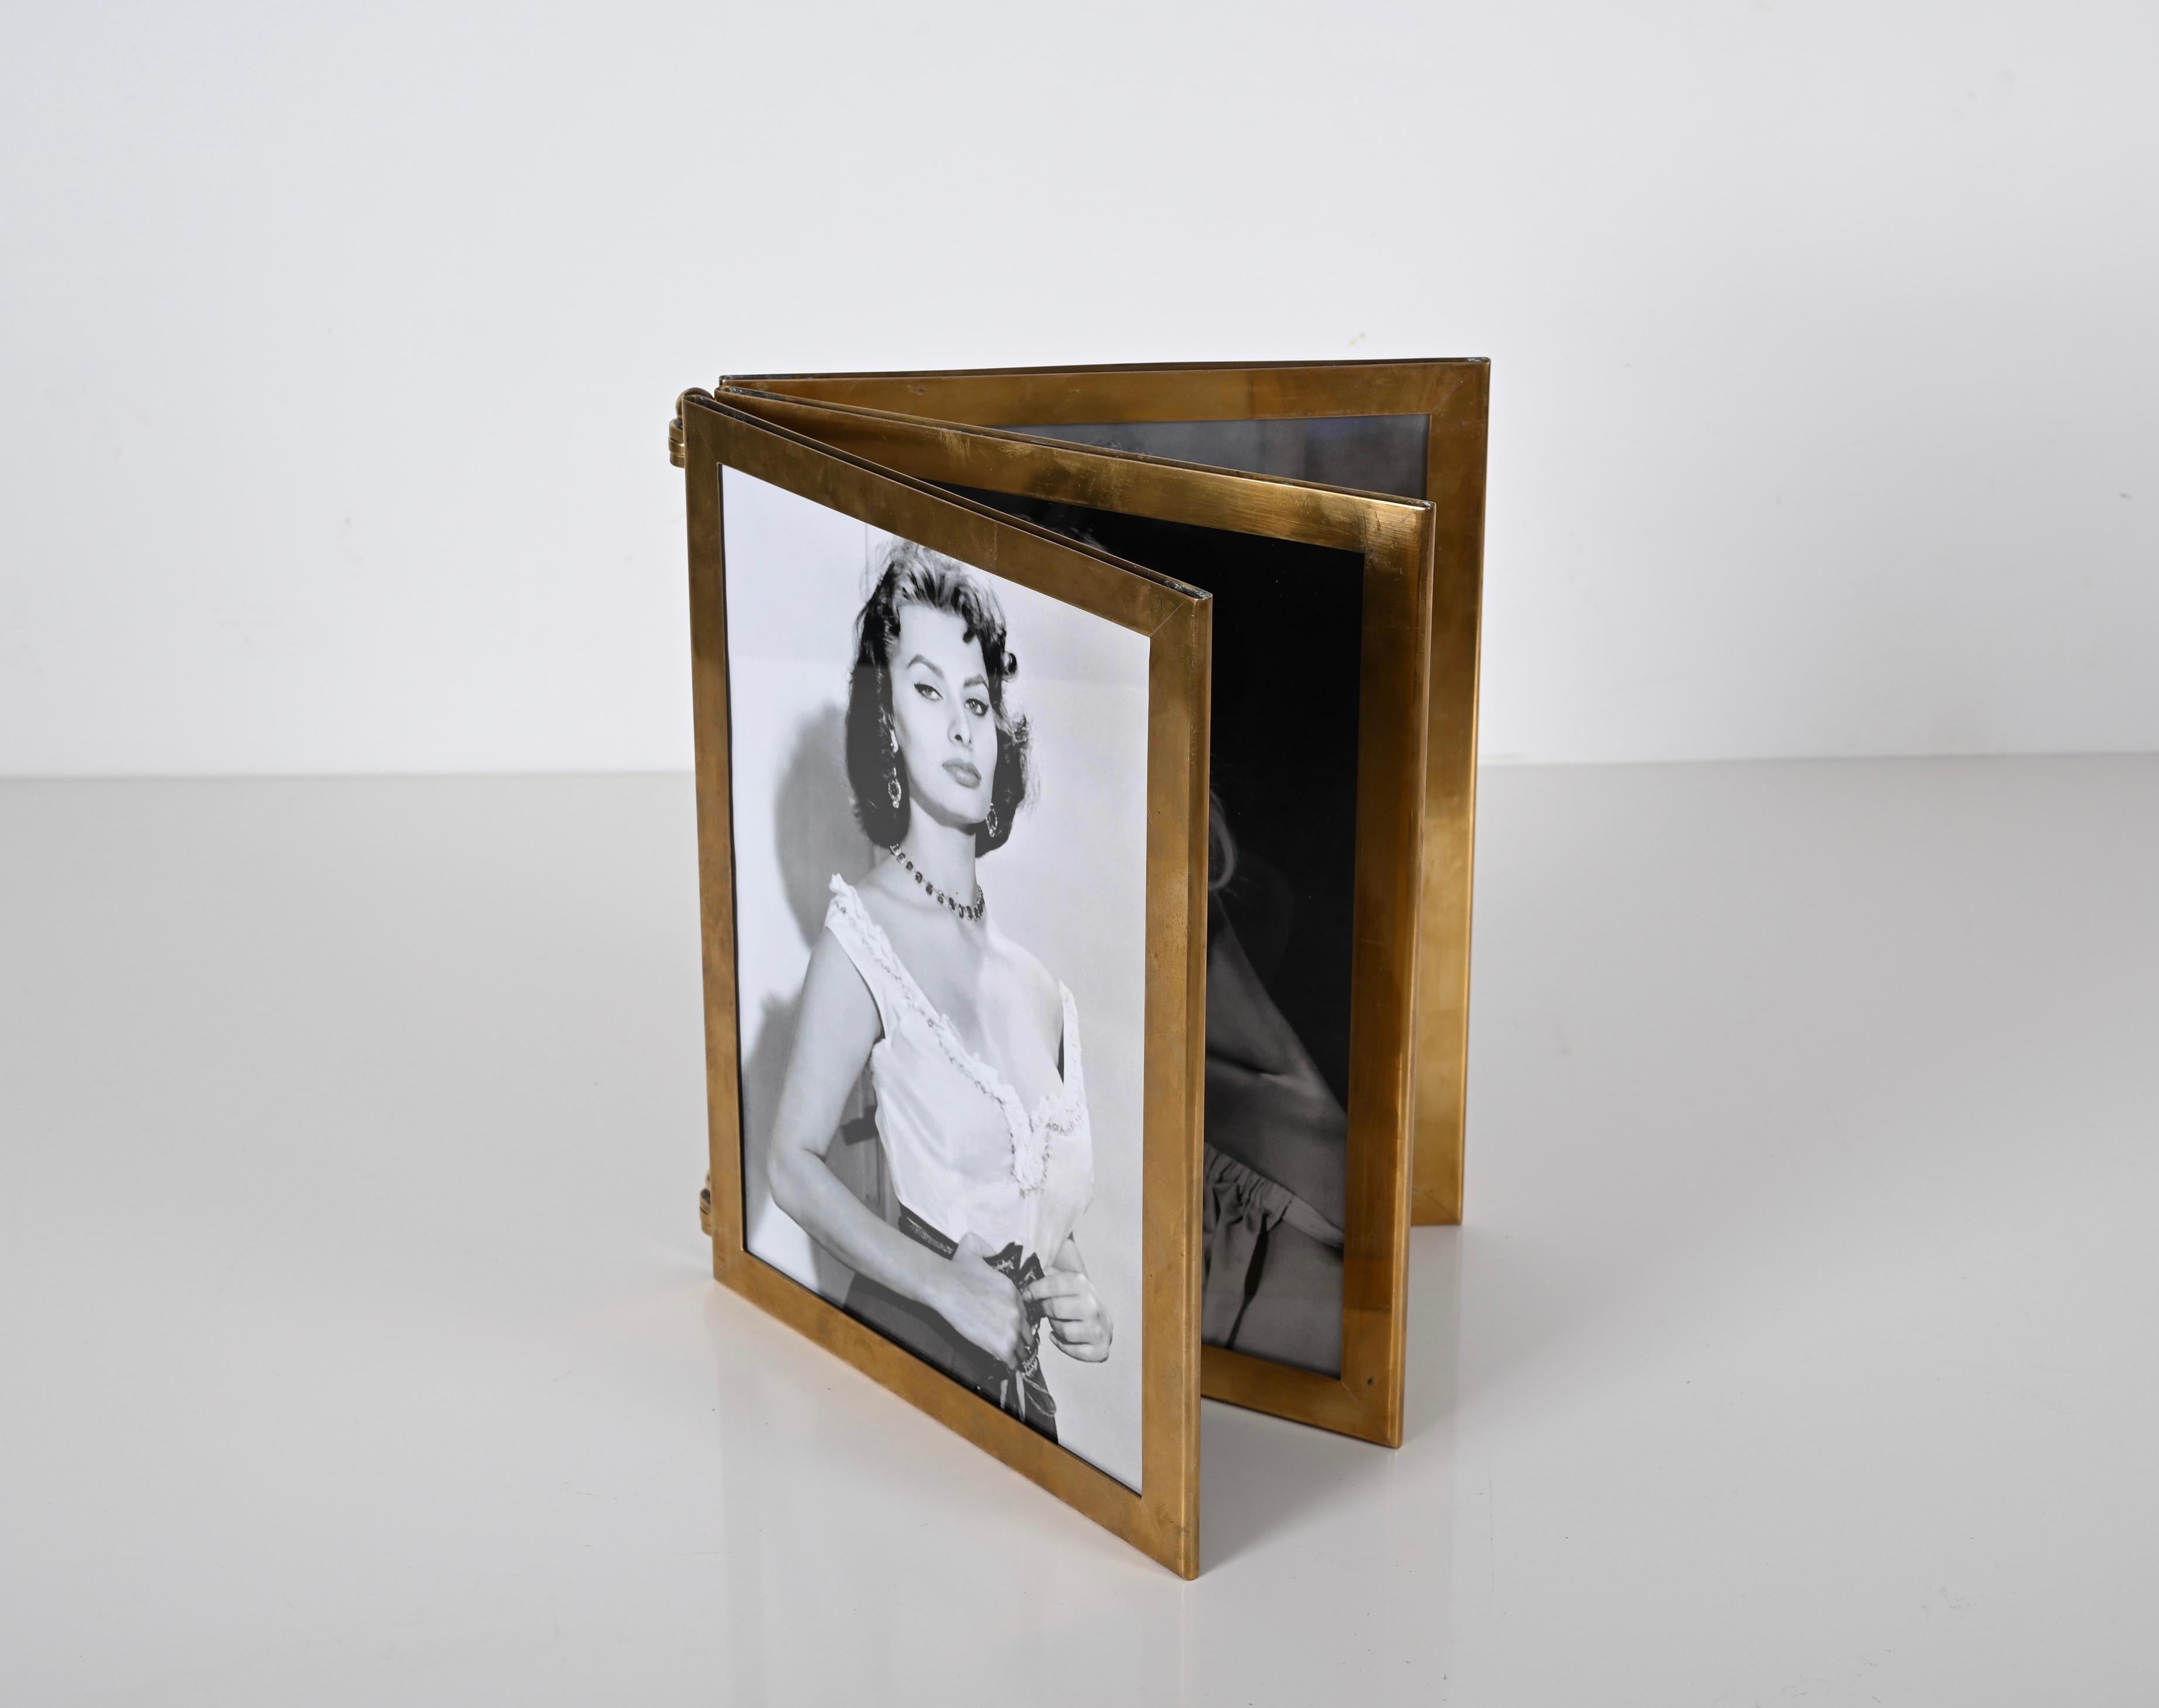 Marvellous Italian picture frame in the shape of a book fully made in solid brass. This outsanding Hollywood Regency piece was made in Italy in the 1950s.

This finely crafted photo frame recalls the the shape of a book and can hold 6 photos.  Fully